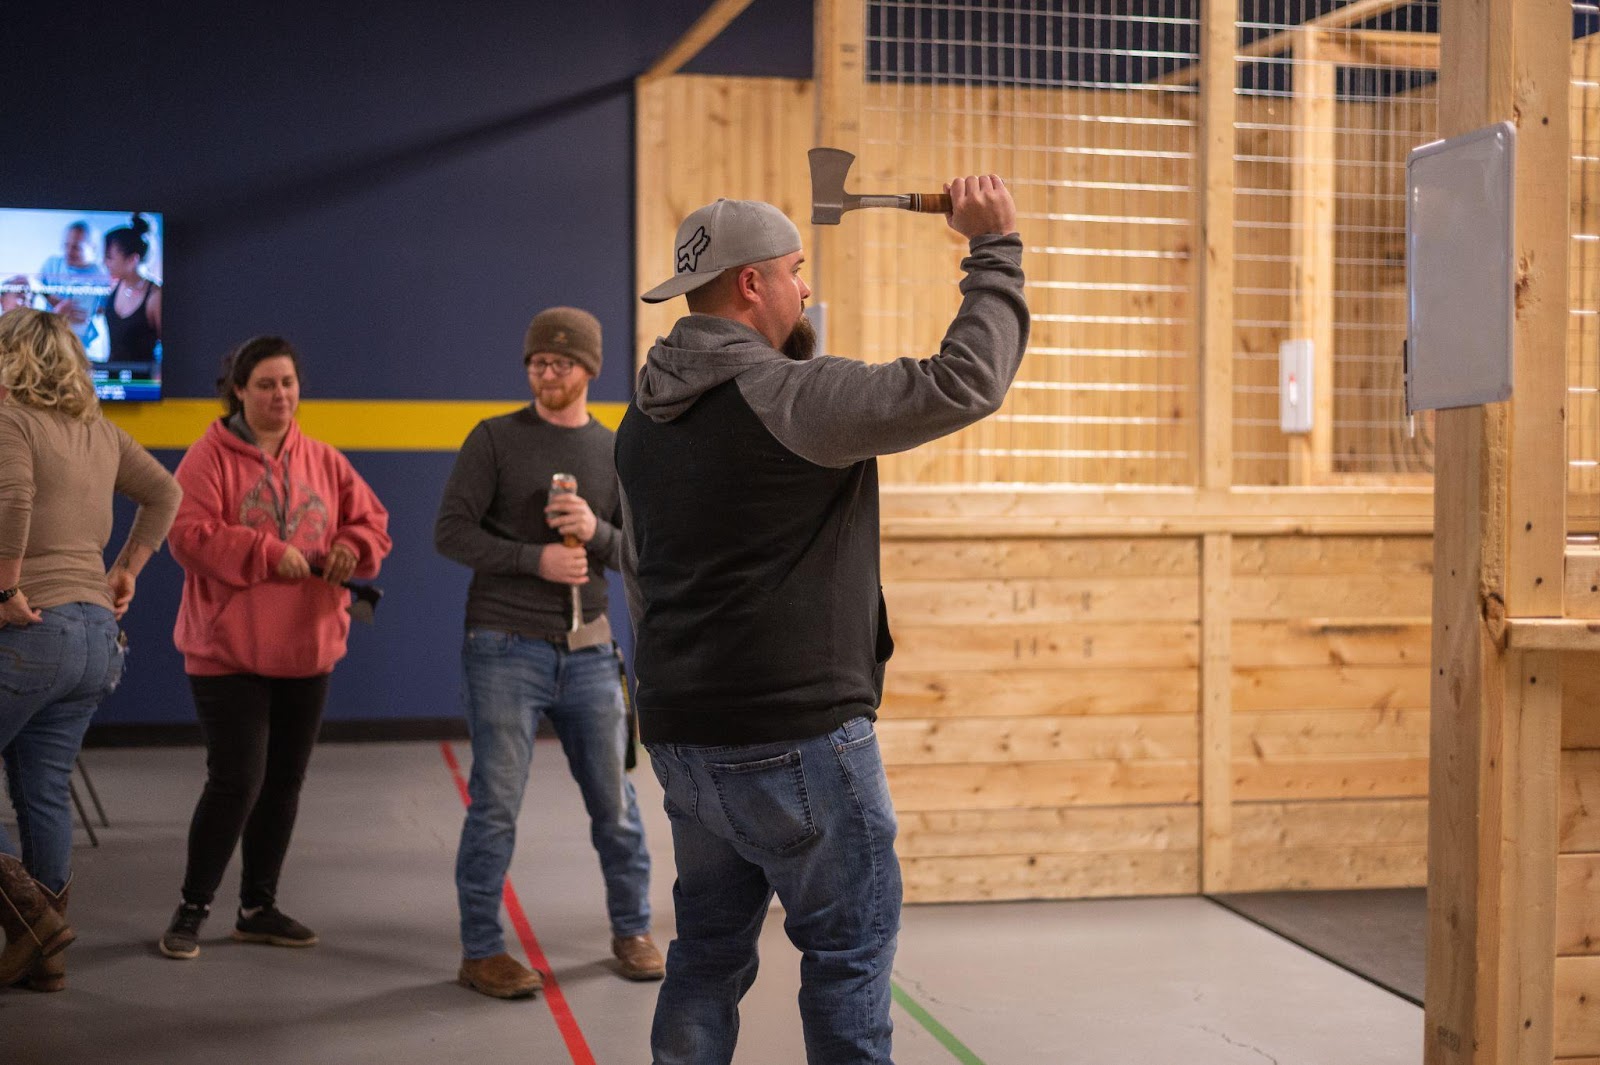 Eye on the target: new axe-throwing business thriving with help from WV SBDC 